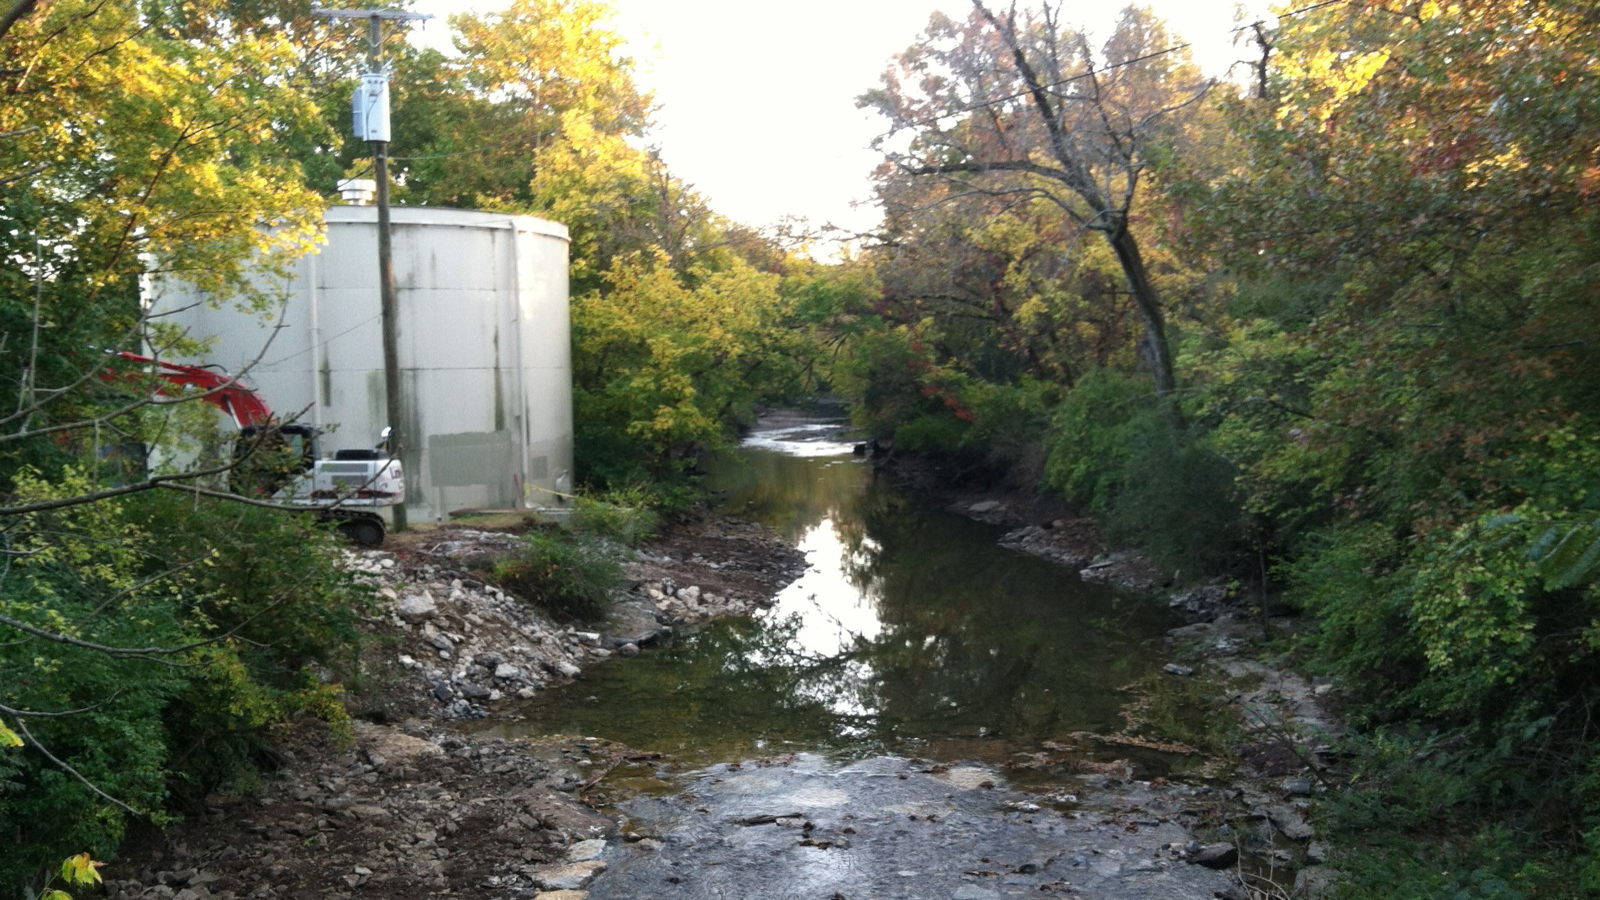 Richland Creek after dam removal. Photo © The Nature Conservancy (Paul F. Kingsbury)